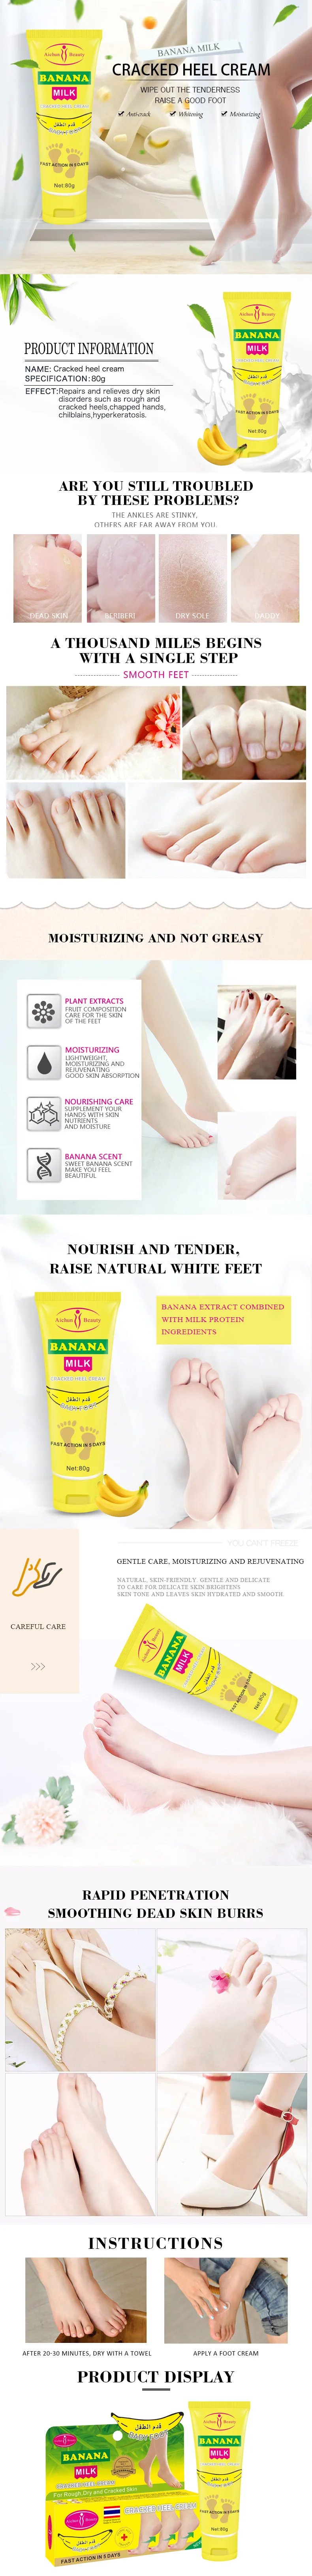 Banana Heel Cream 40g (For Dry Cracked Heels & Other Rough Areas) By  PreciousSkin | Shopee Malaysia